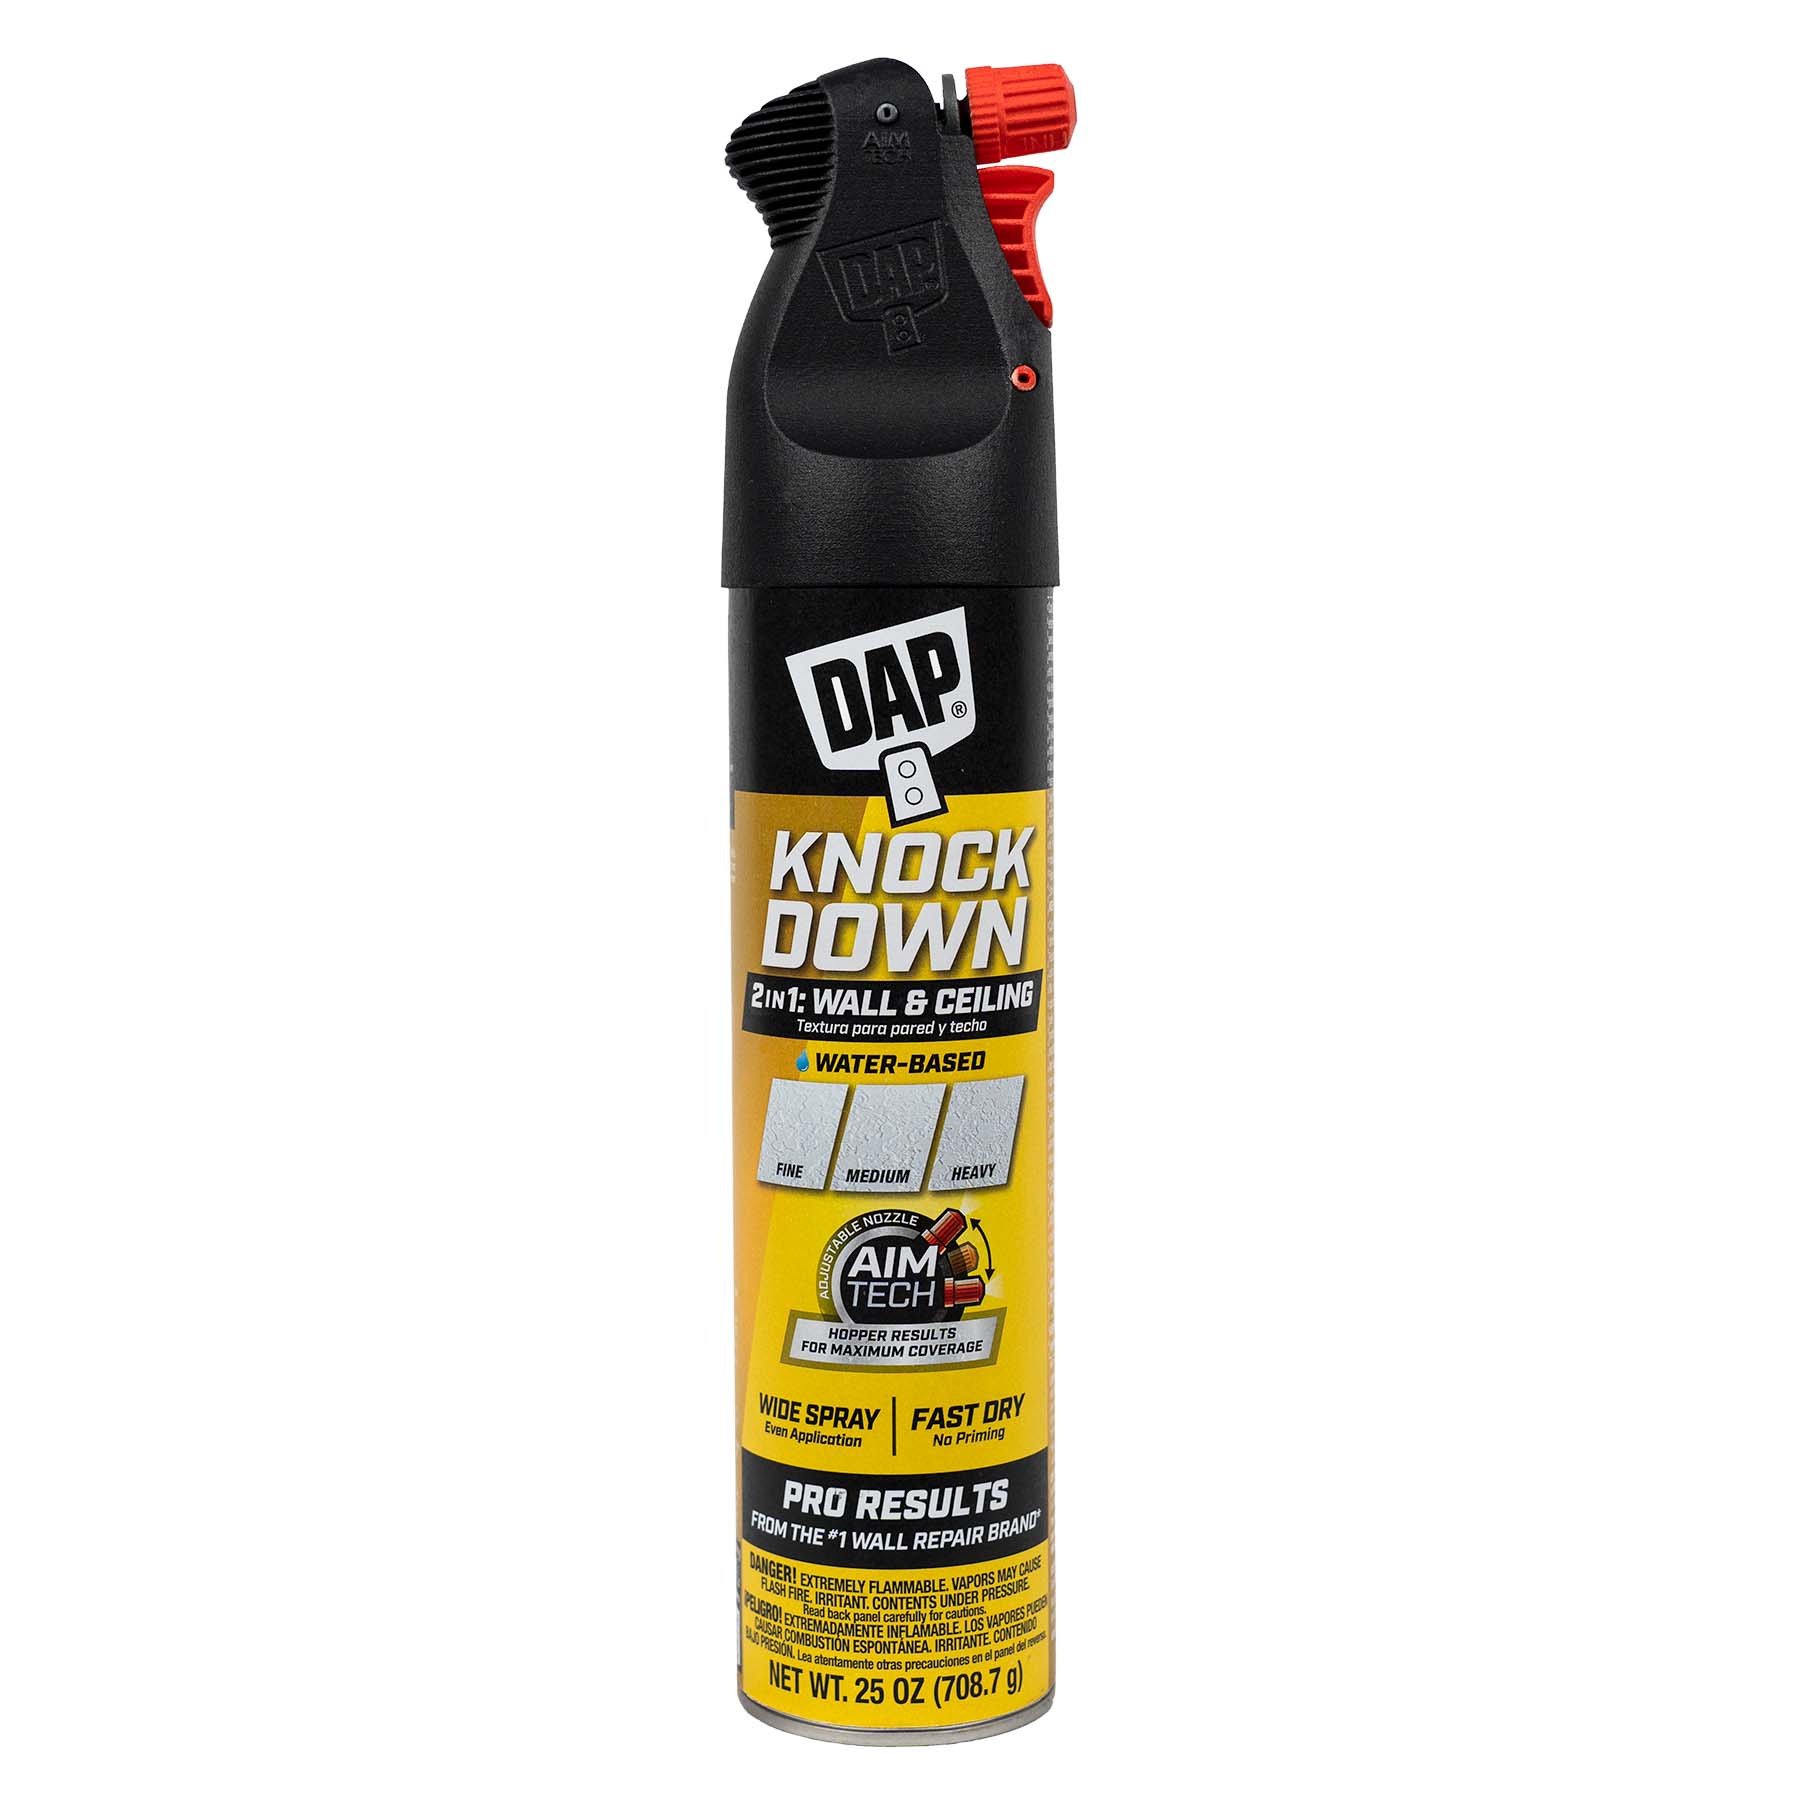 DAP® Launches Its First Spray Foam Designed for Arts & Crafts Enthusiasts